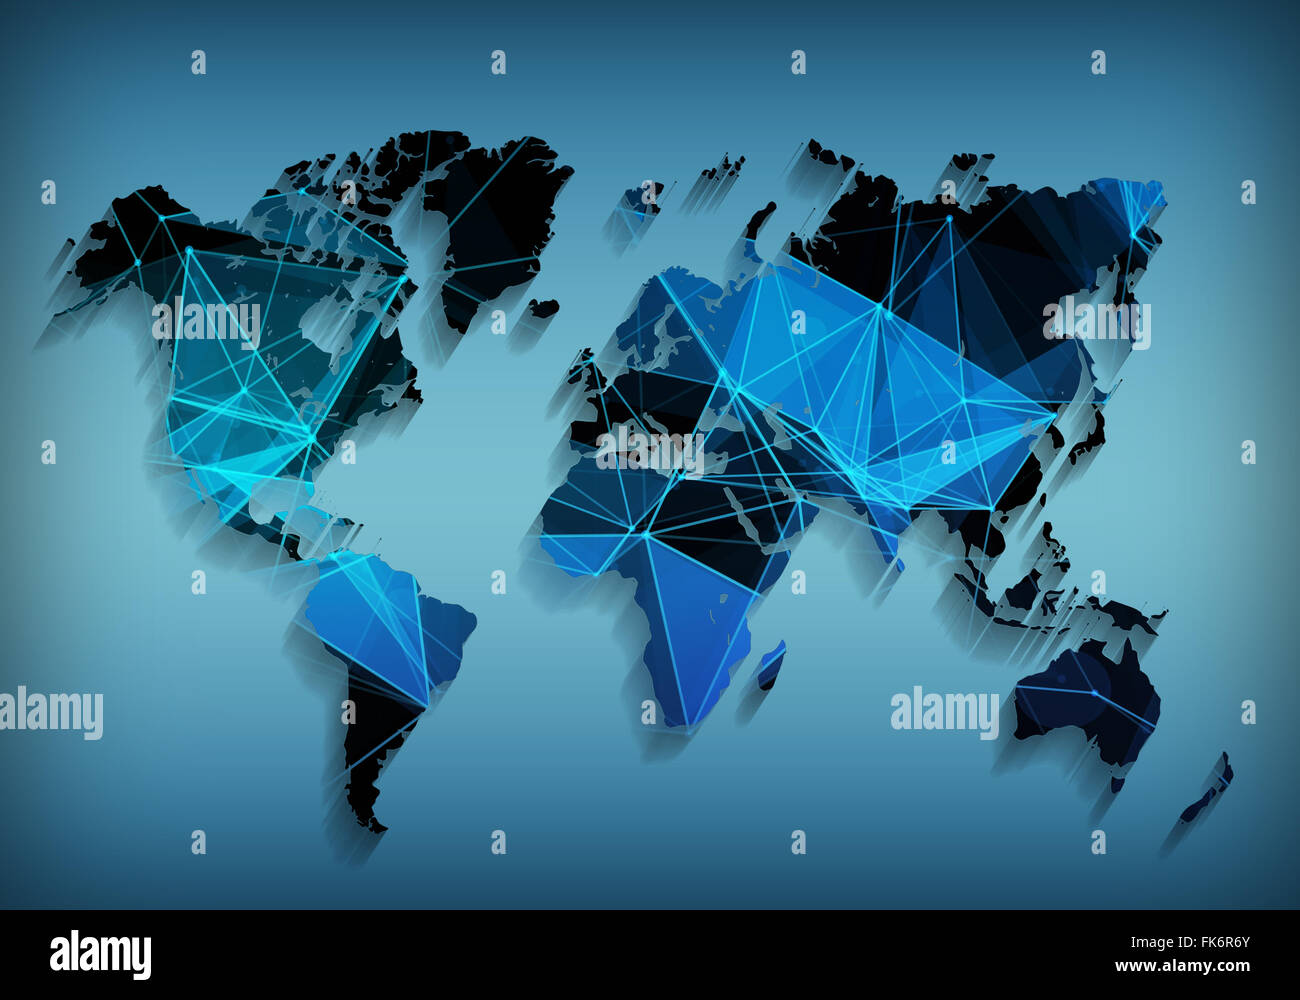 Abstract telecommunication world map with triangle, lines and dots Stock Photo